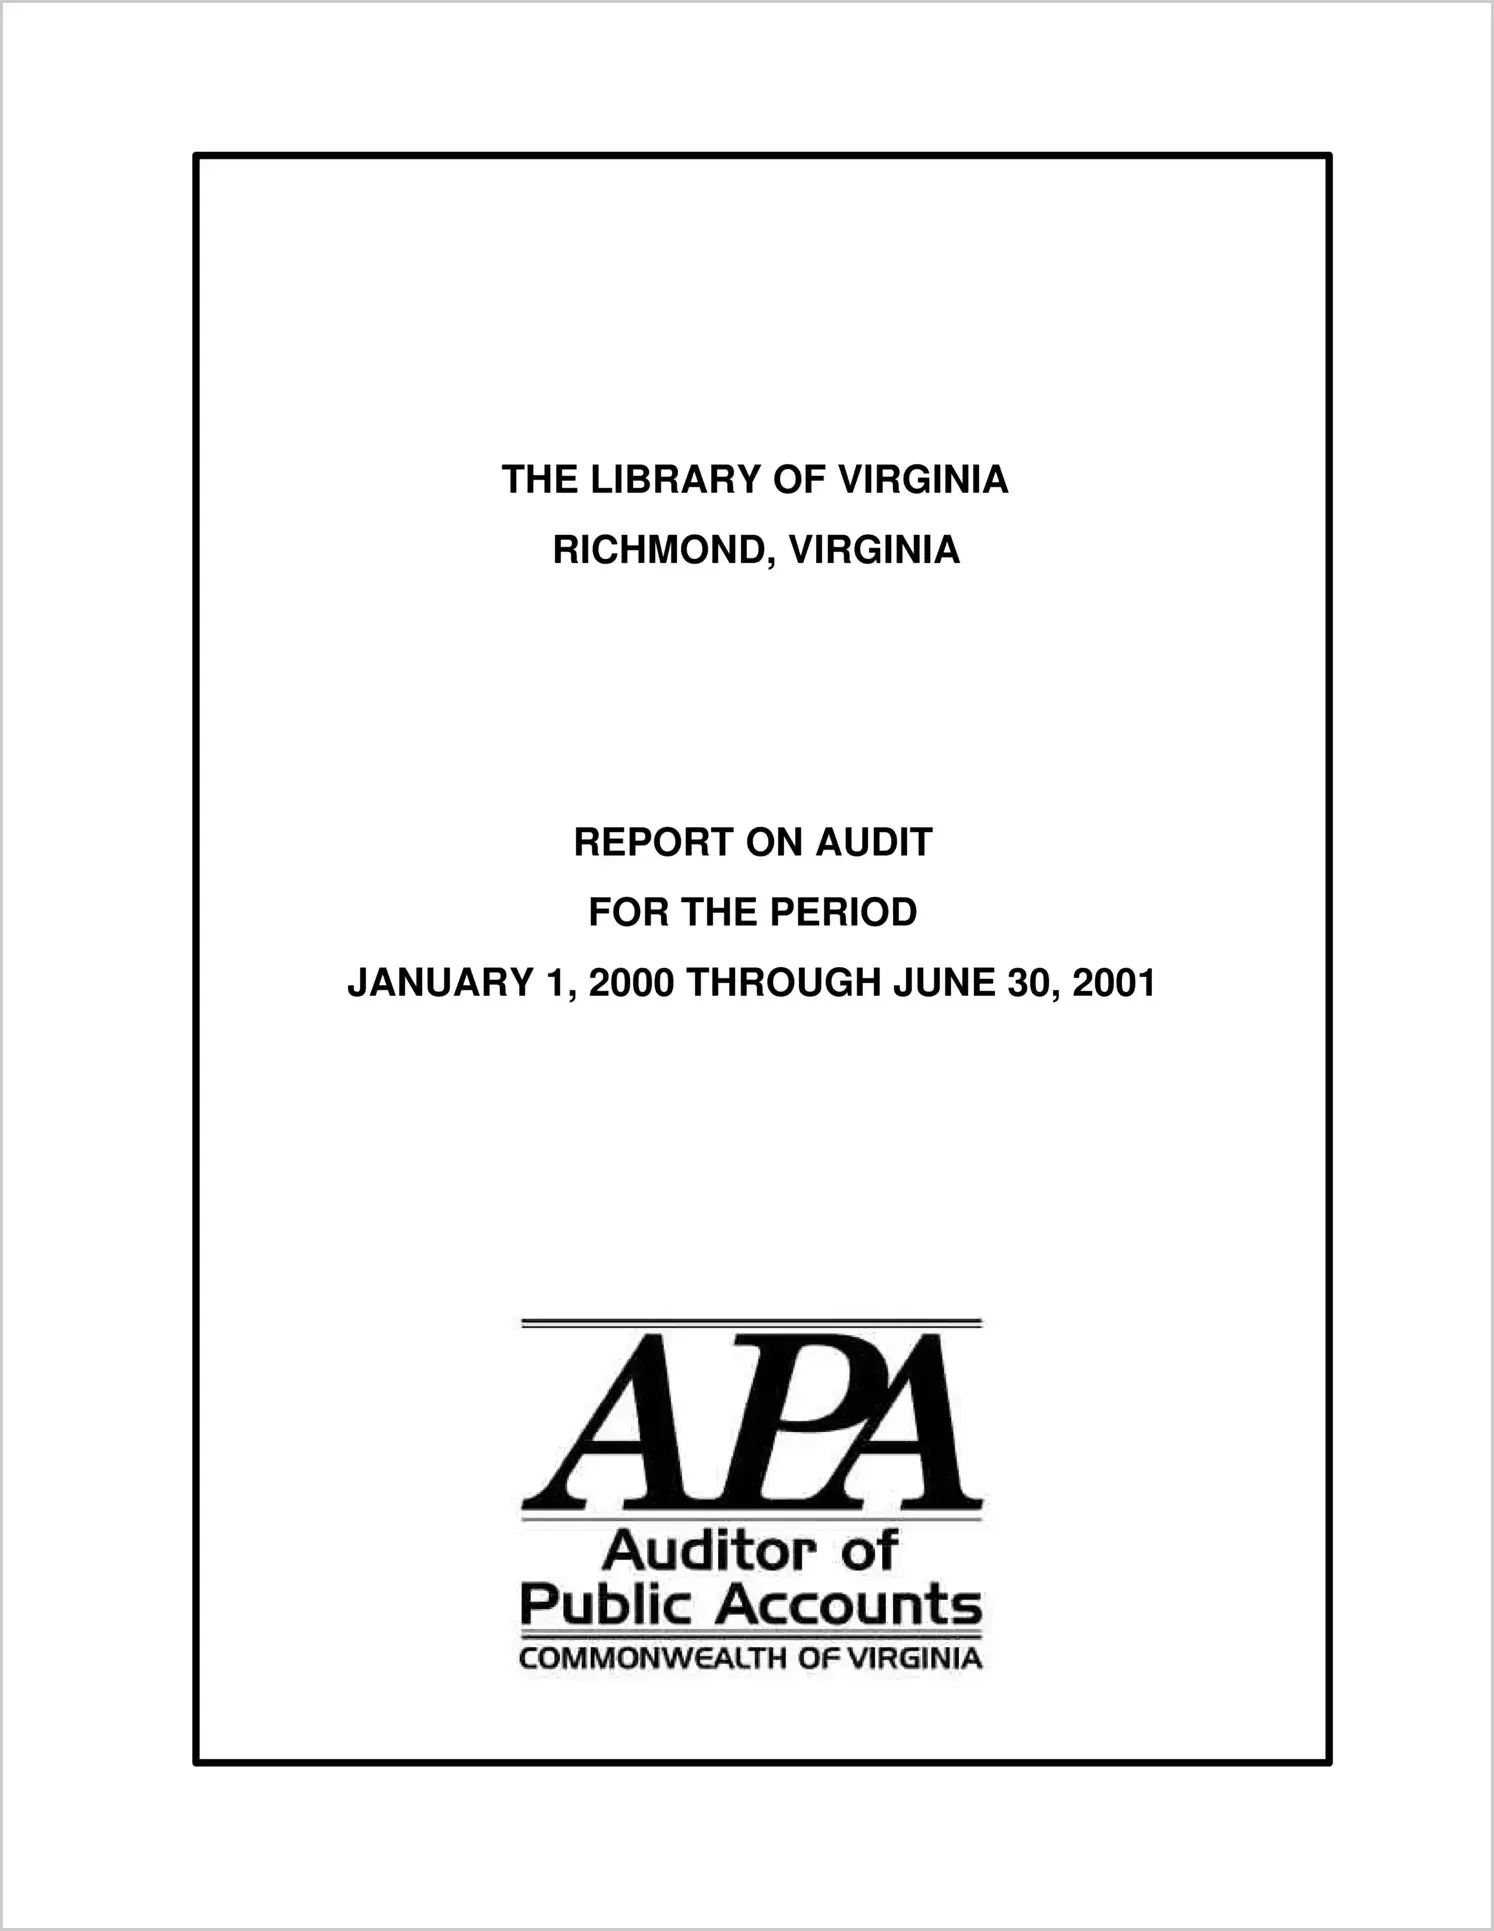 The Library of Virginia for the period January 1, 2000 through June 30, 2001